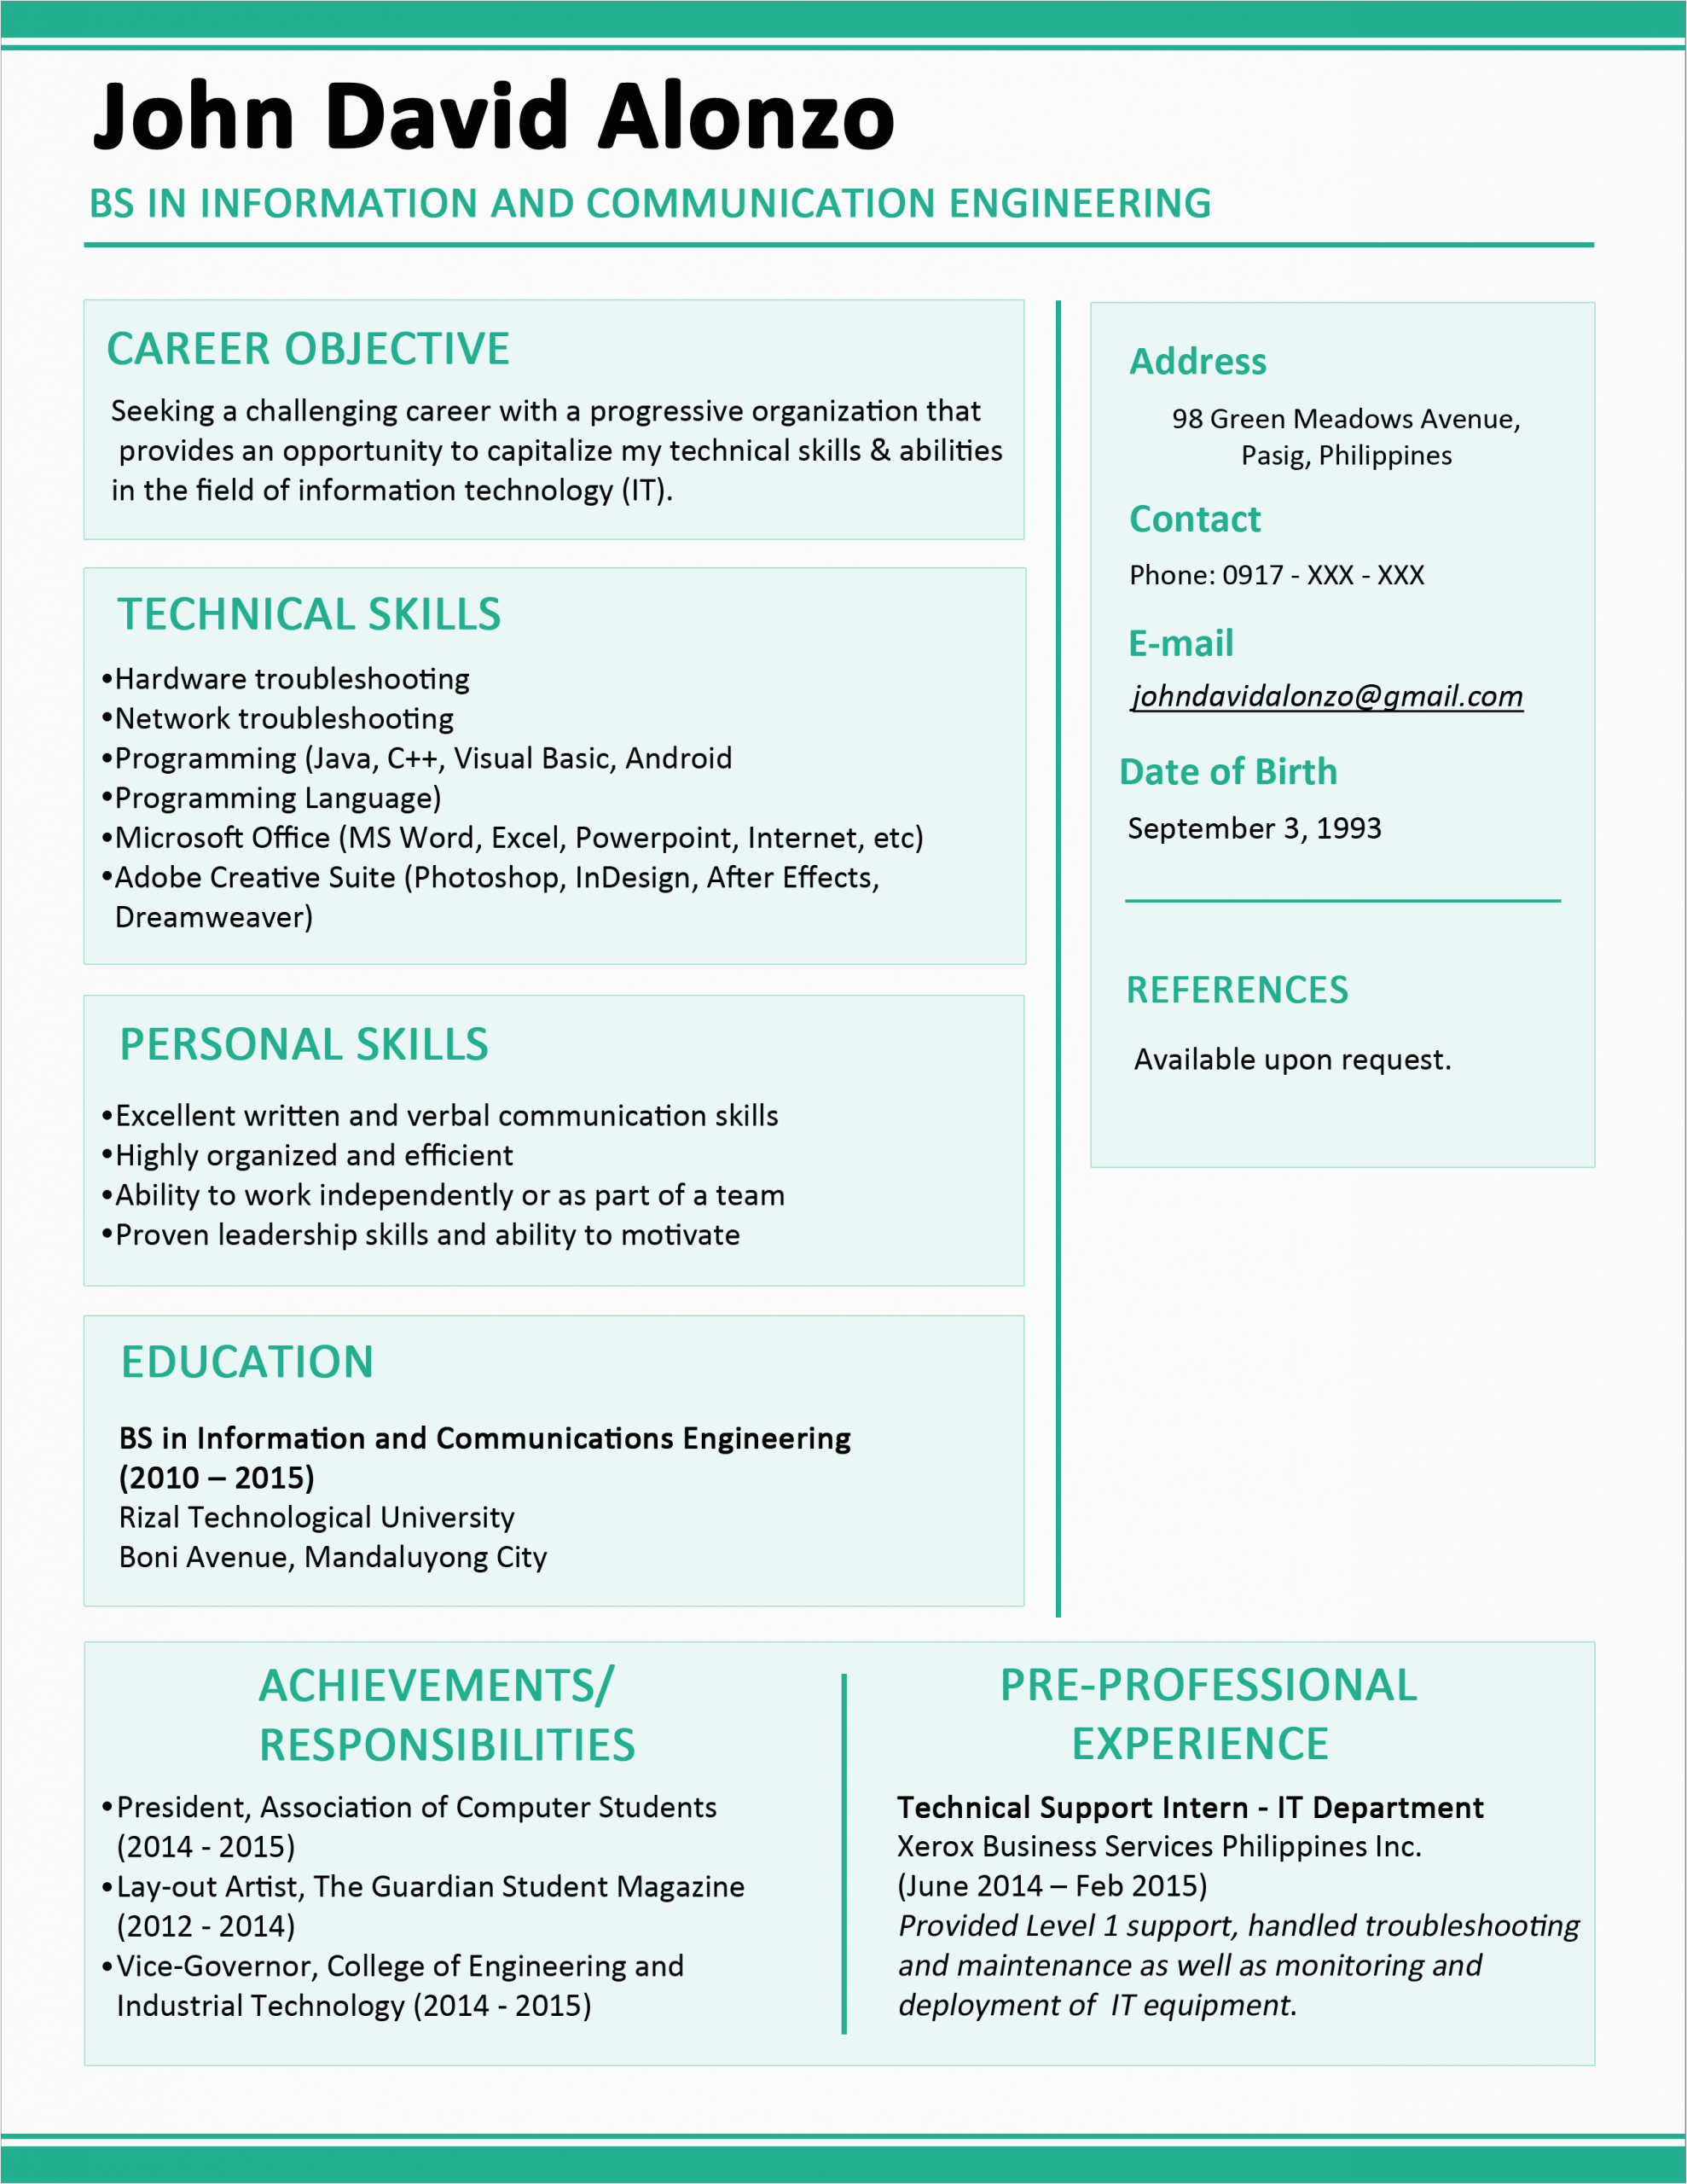 Resume Sample for It Fresh Graduate 30 Simple and Basic Resume Templates for All Jobseekers